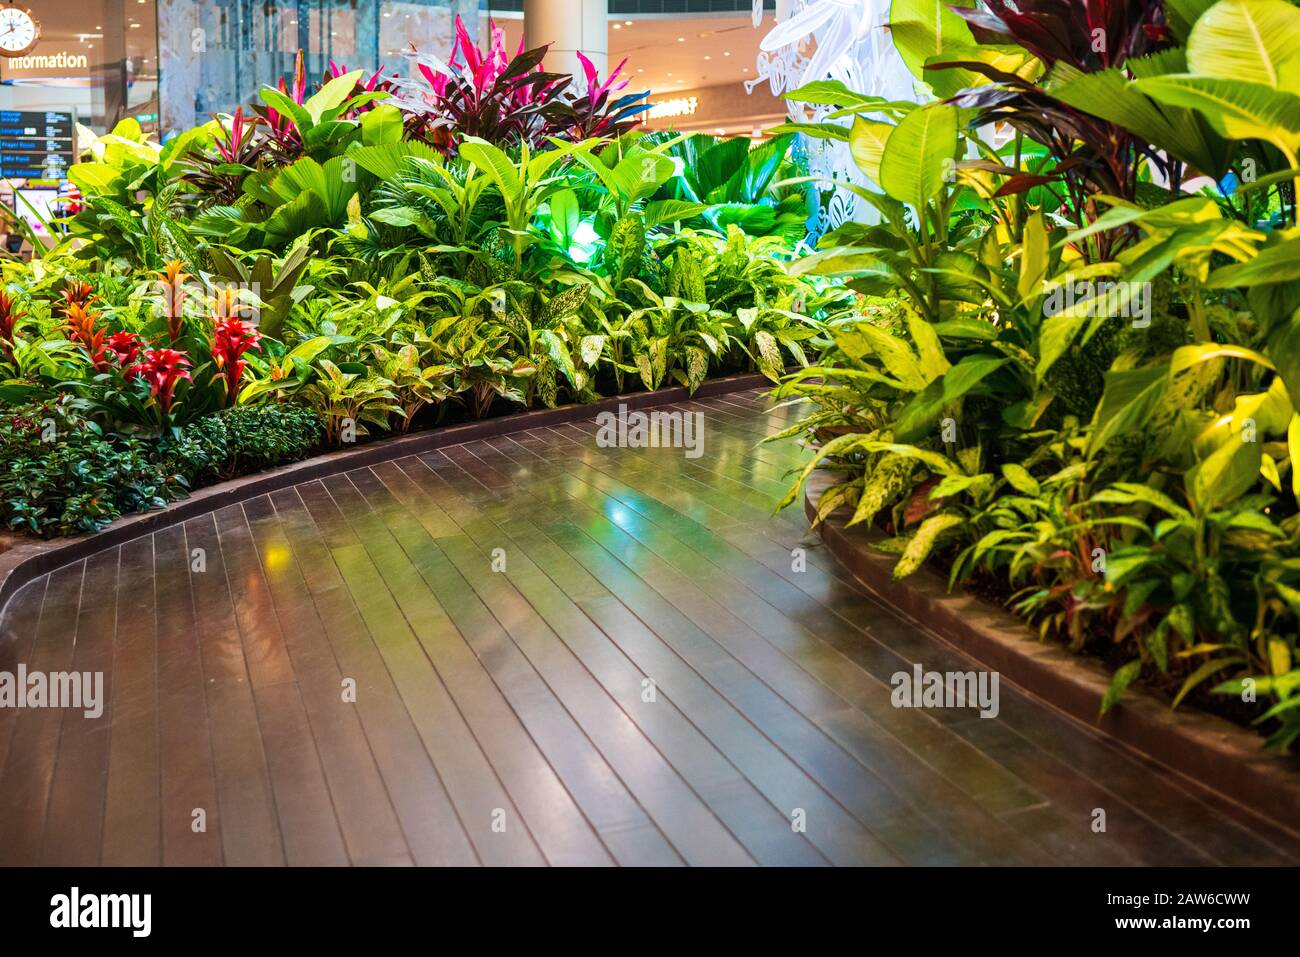 Relax in Singapore's new airport terminal